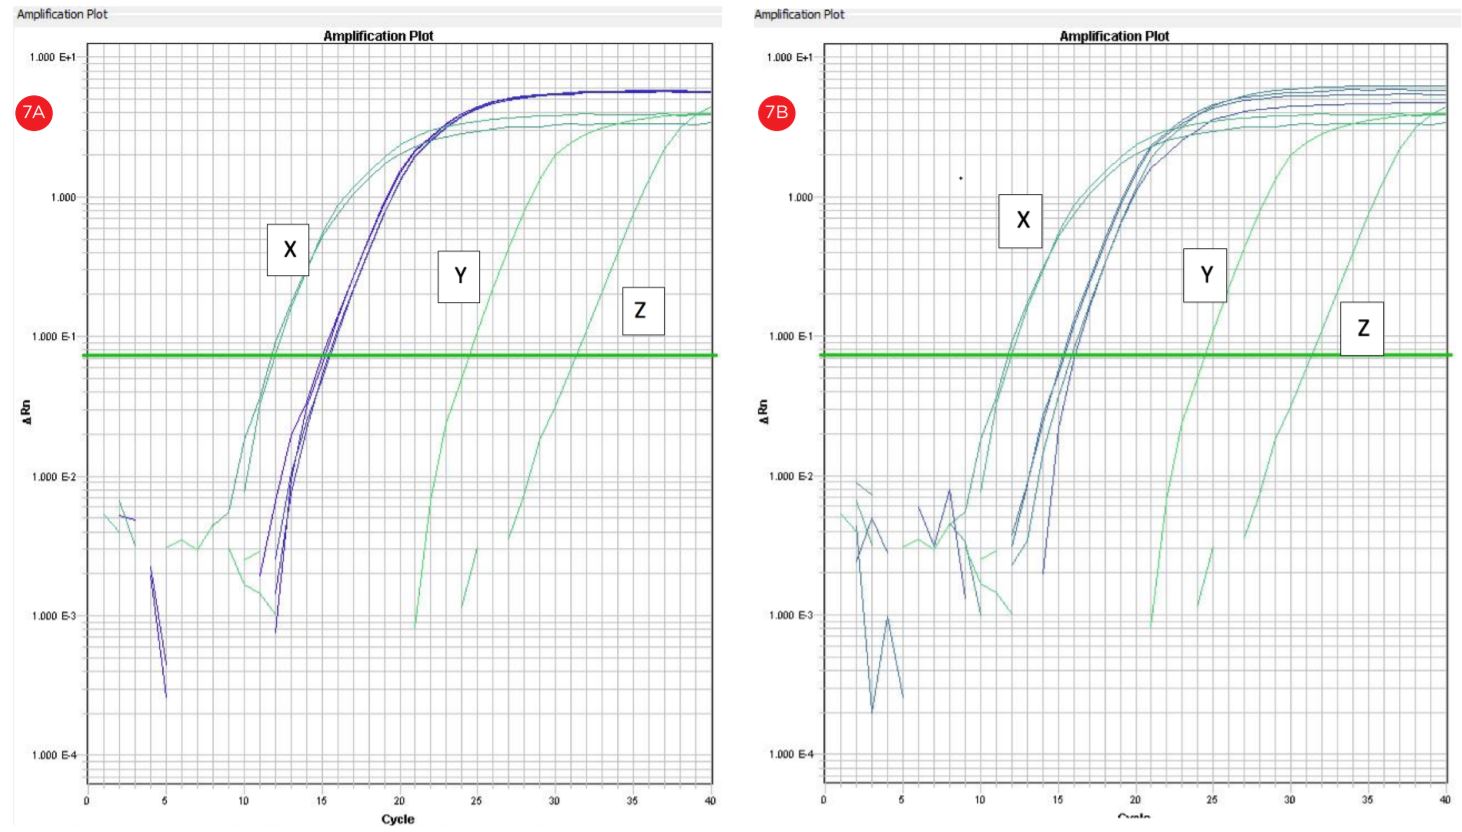 Figure 7. qRT-PCR amplification plots (cycle number vs. florescence) corresponding to automated (a) and manual (b) RNA templates. RNA template concentration 150 ng/uL; X: positive control 200 ng/uL; y: no RT control; z: no template control